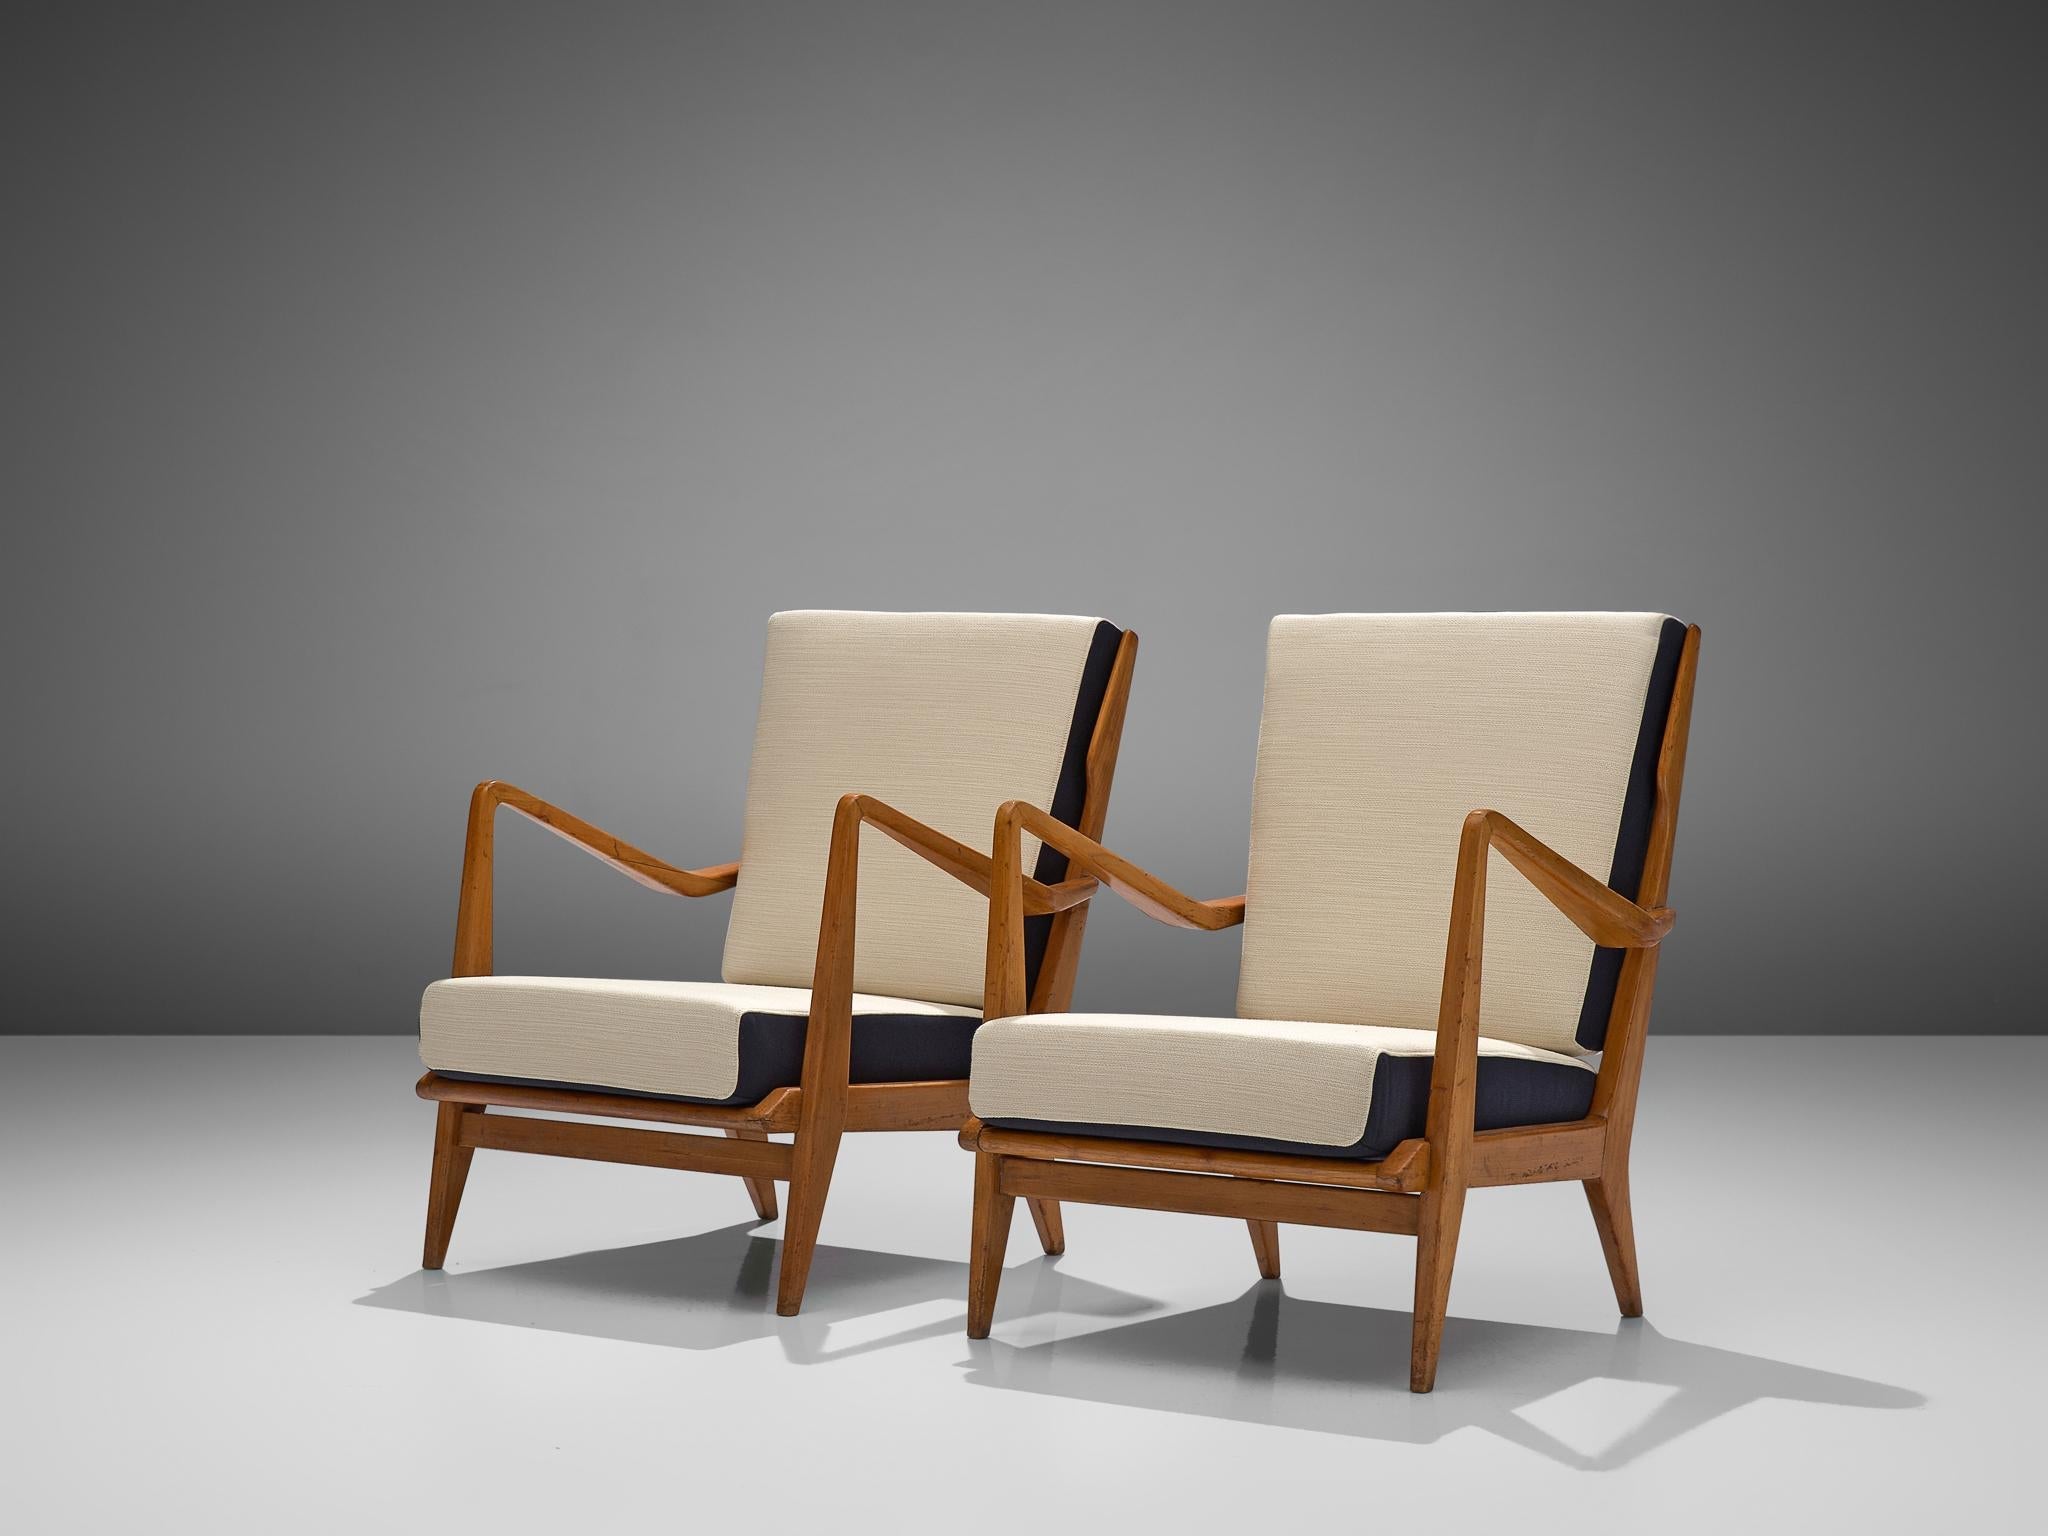 Gio Ponti for Cassina Pair of Armchairs in Cherry